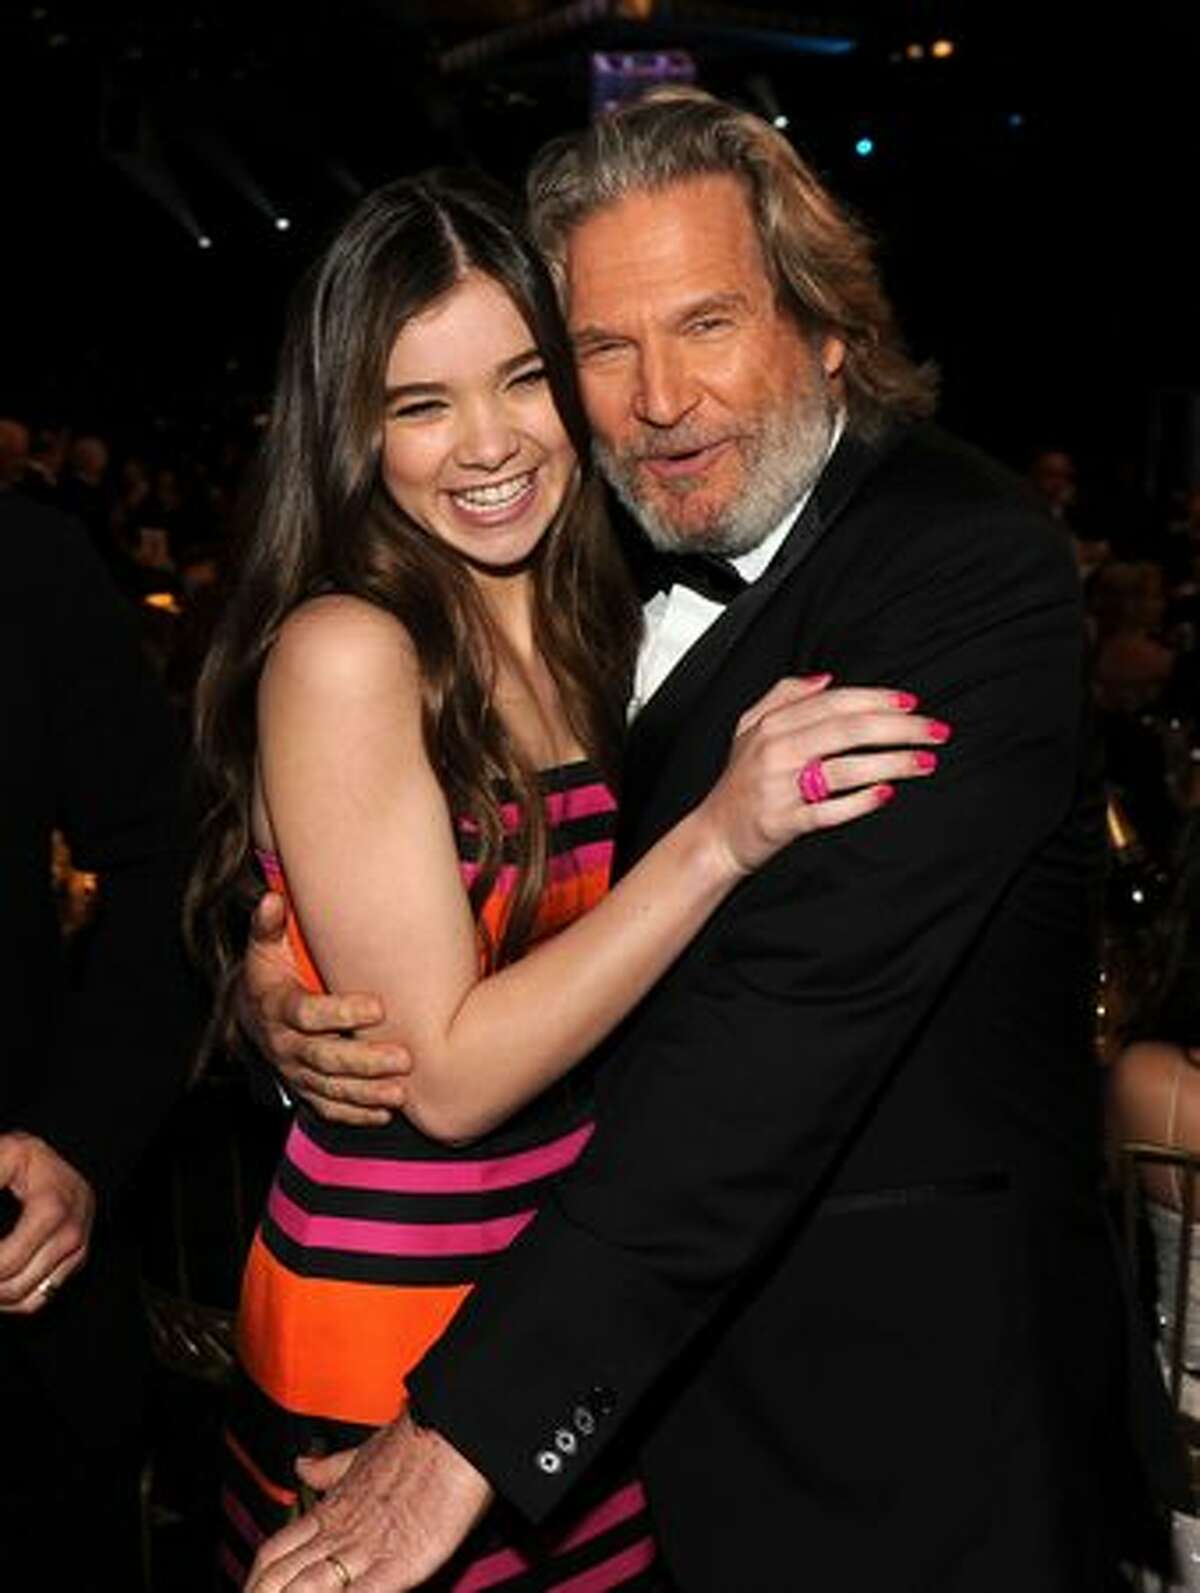 Actress Hailee Steinfeld and Actor Jeff Bridges attend the cocktail reception that followed the 17th annual Screen Actors Guild Awards in Los Angeles on Sunday, Jan. 30, 2011.